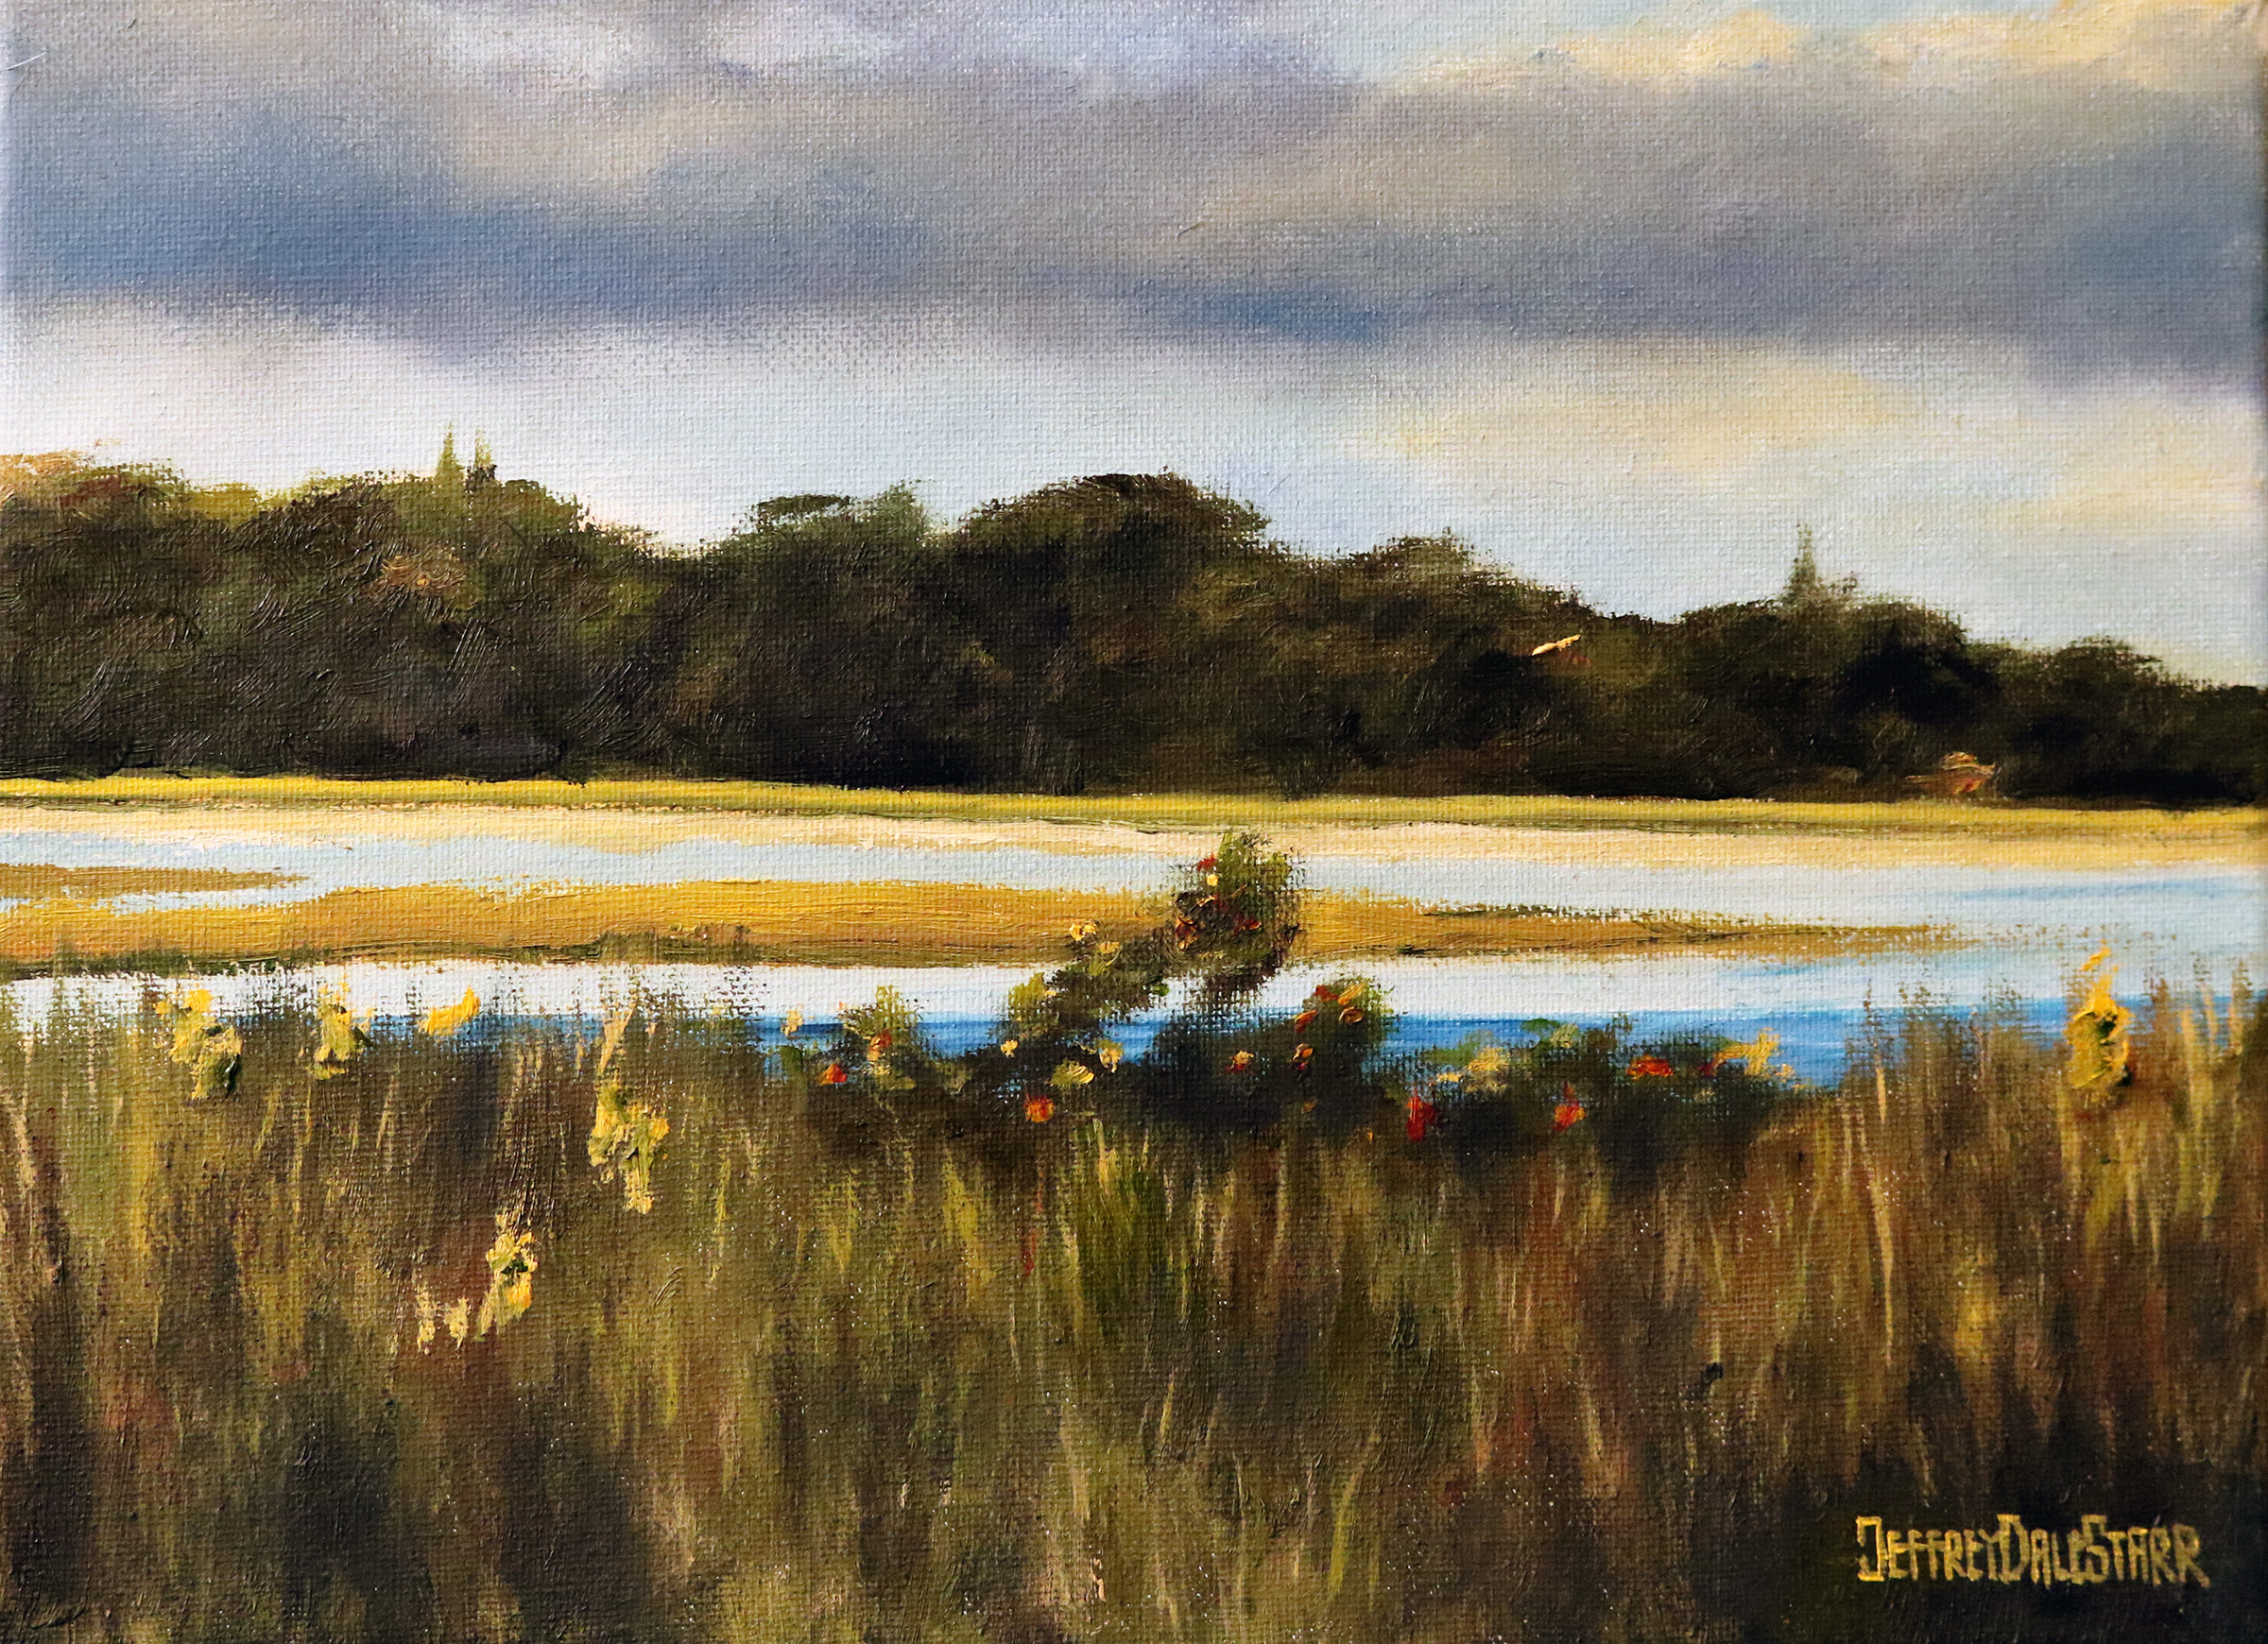 Oil painting "Grassy Trail on a Cape Cod Beach" by Jeffrey Dale Starr